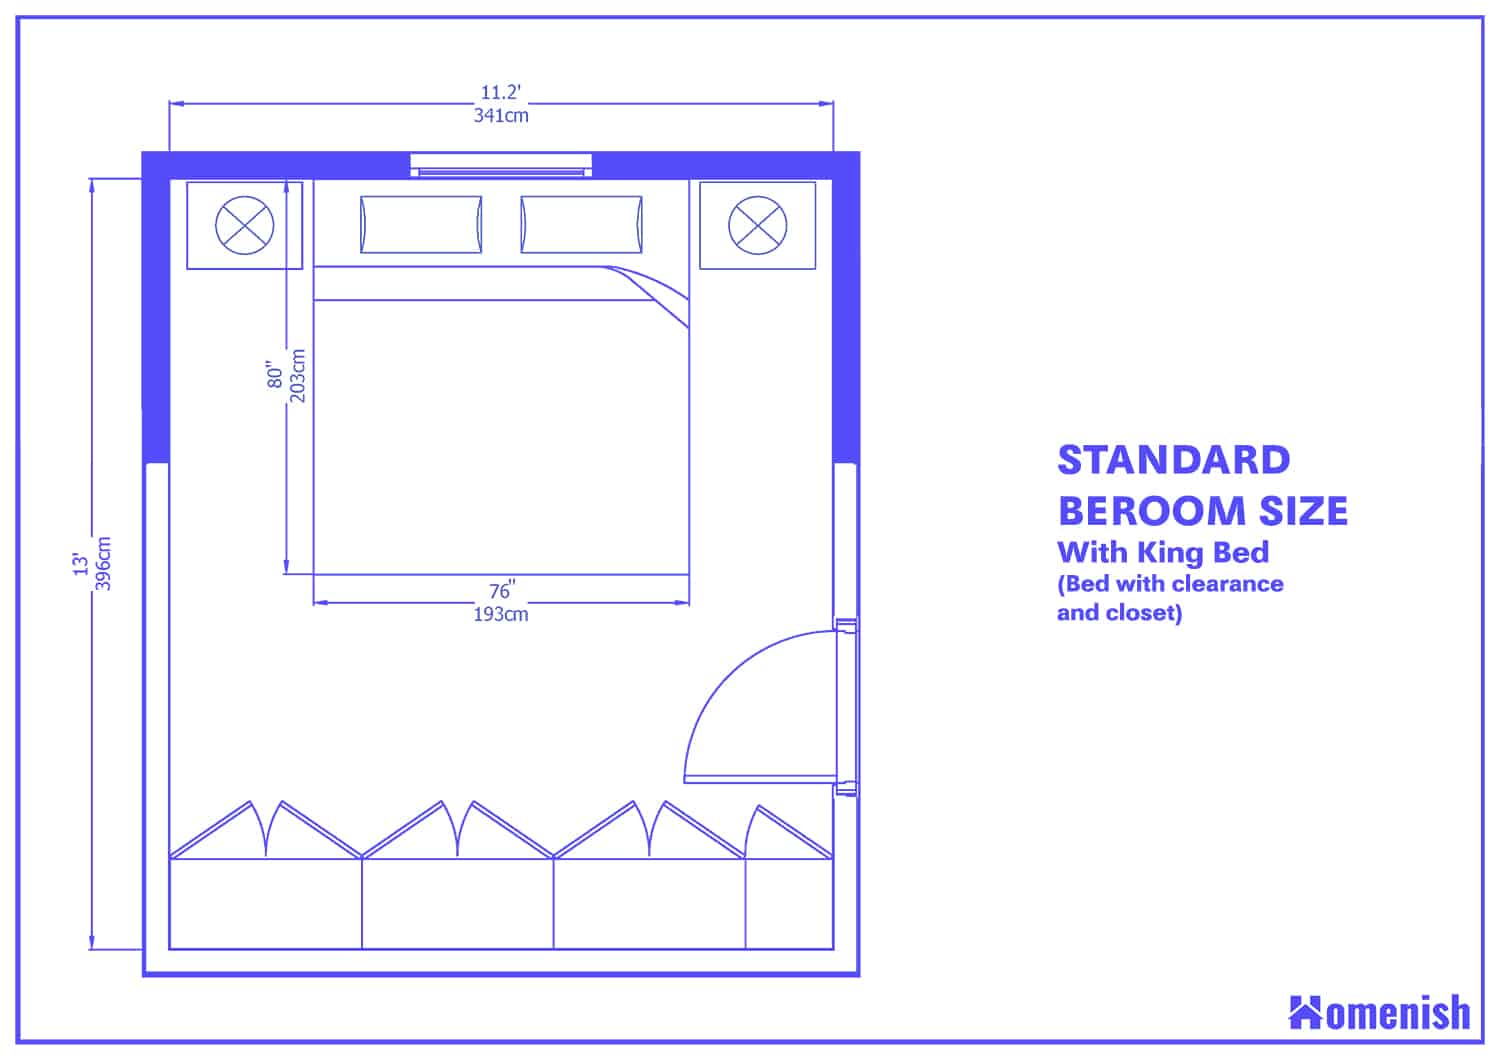 Average Bedroom Size And Layout Guide, What Is The Standard Size Of A King Size Bed